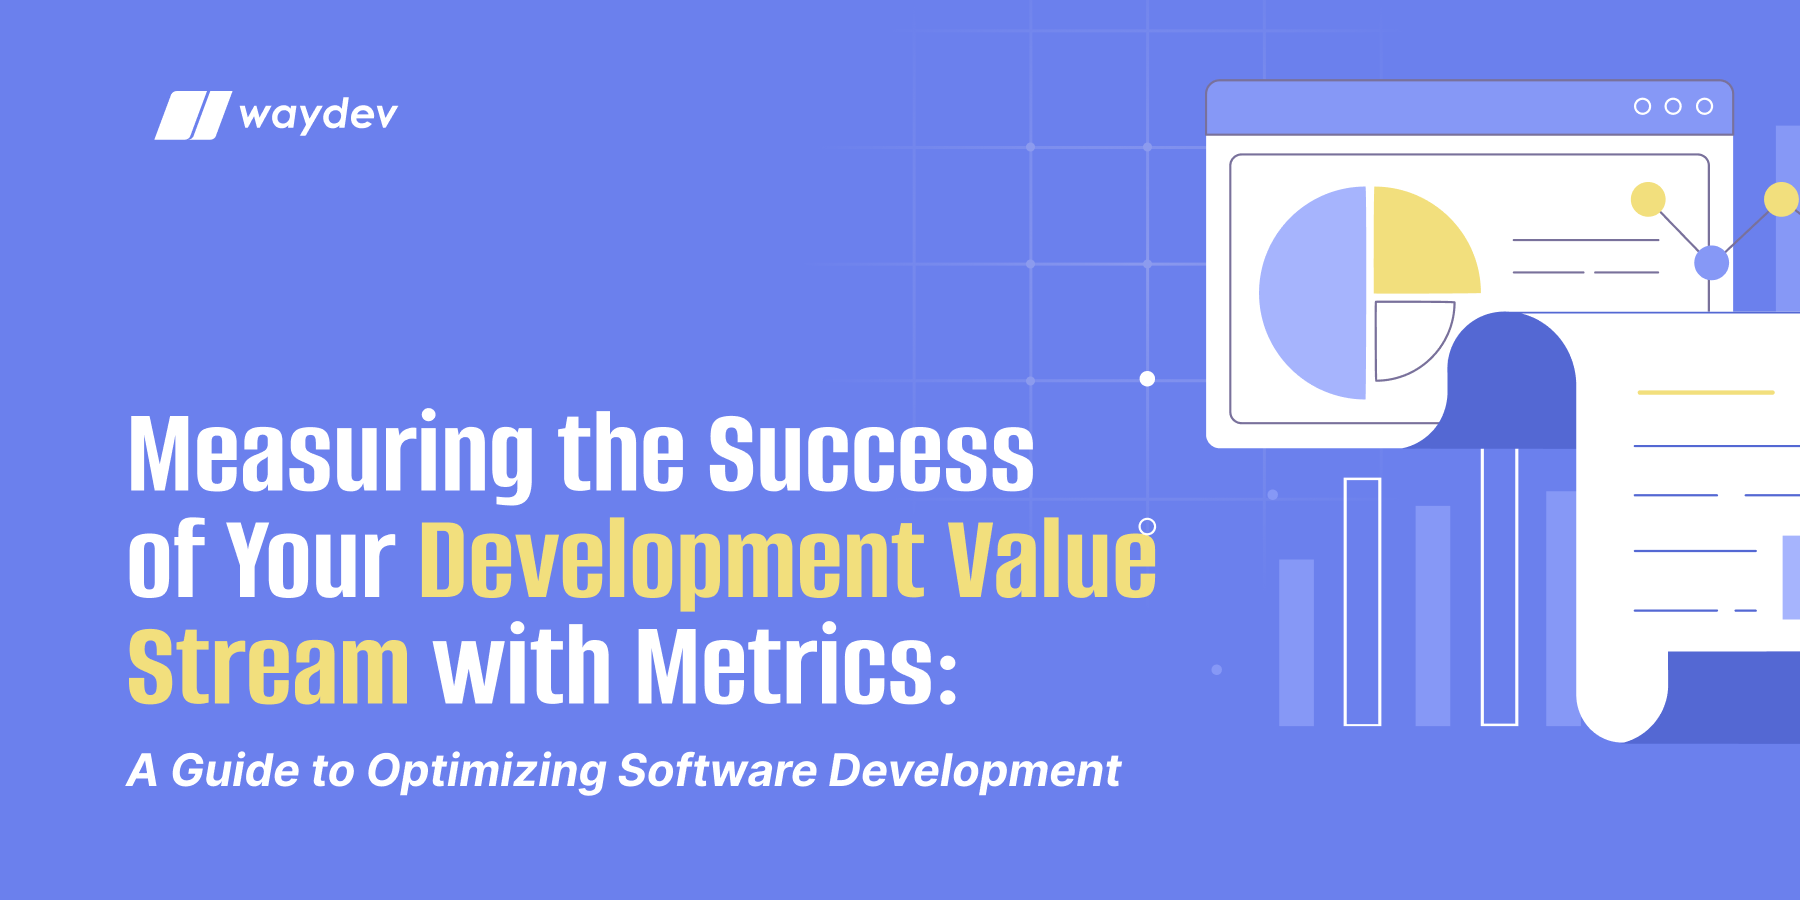 Measuring the Success of Your Development Value Stream with Metrics